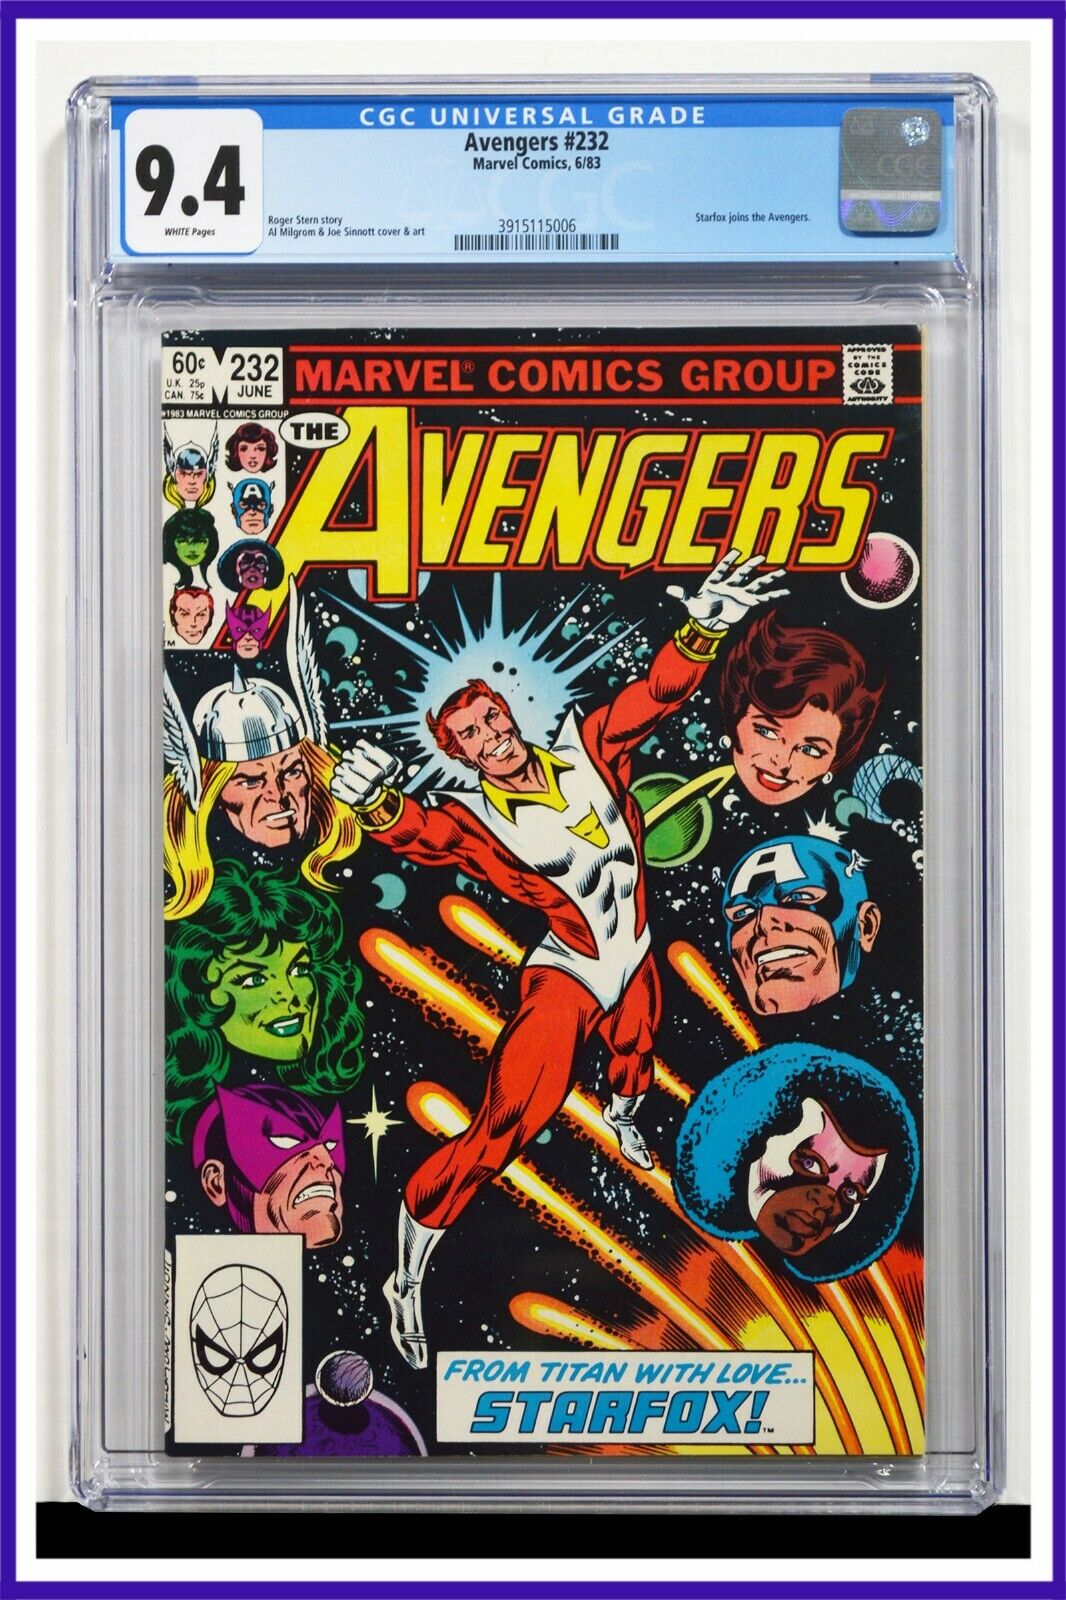 Avengers #232 CGC Graded 9.4 Marvel June 1983 White Pages Comic Book.